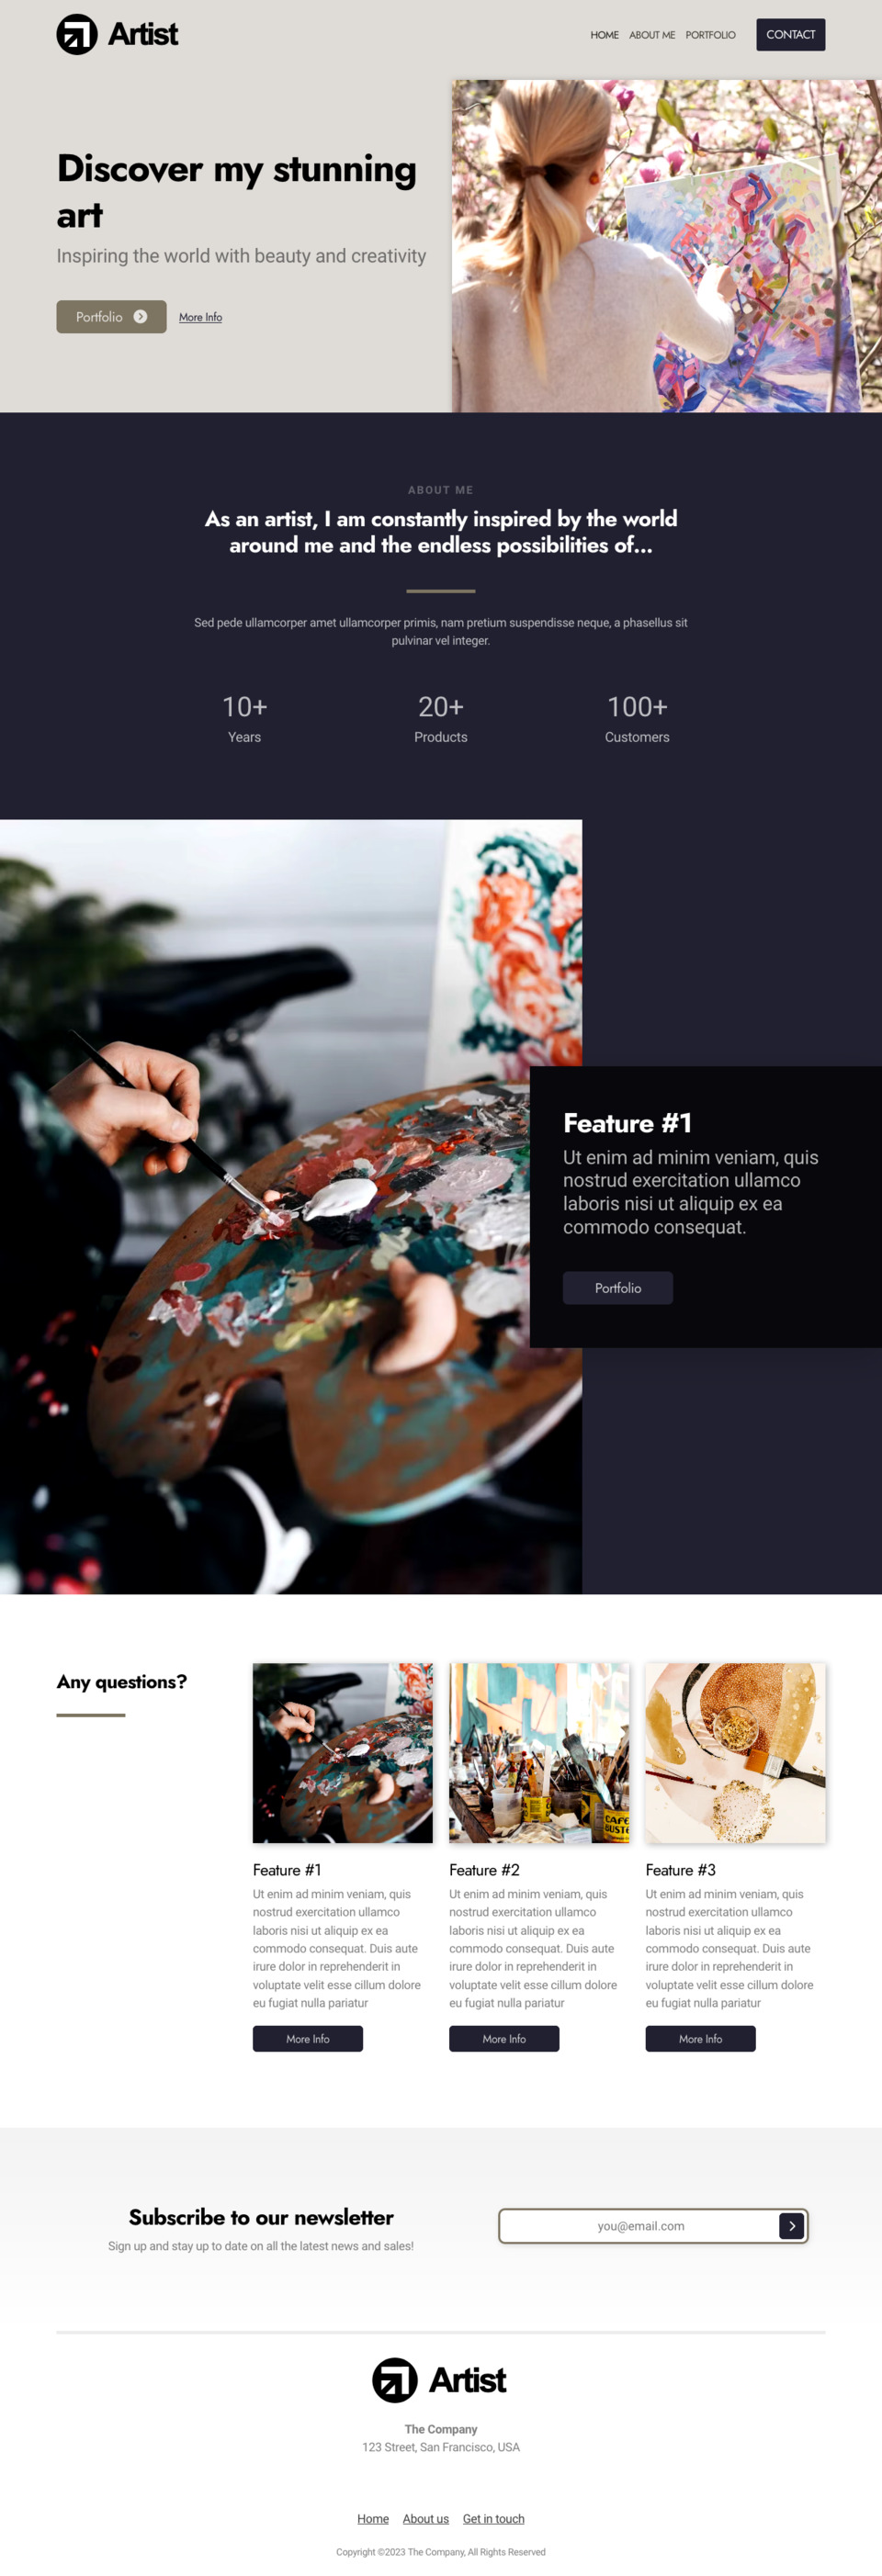 Artist Website Template - Ideal for artists, graphic designers, photographers, art galleries, and anyone looking to create a visually stunning website